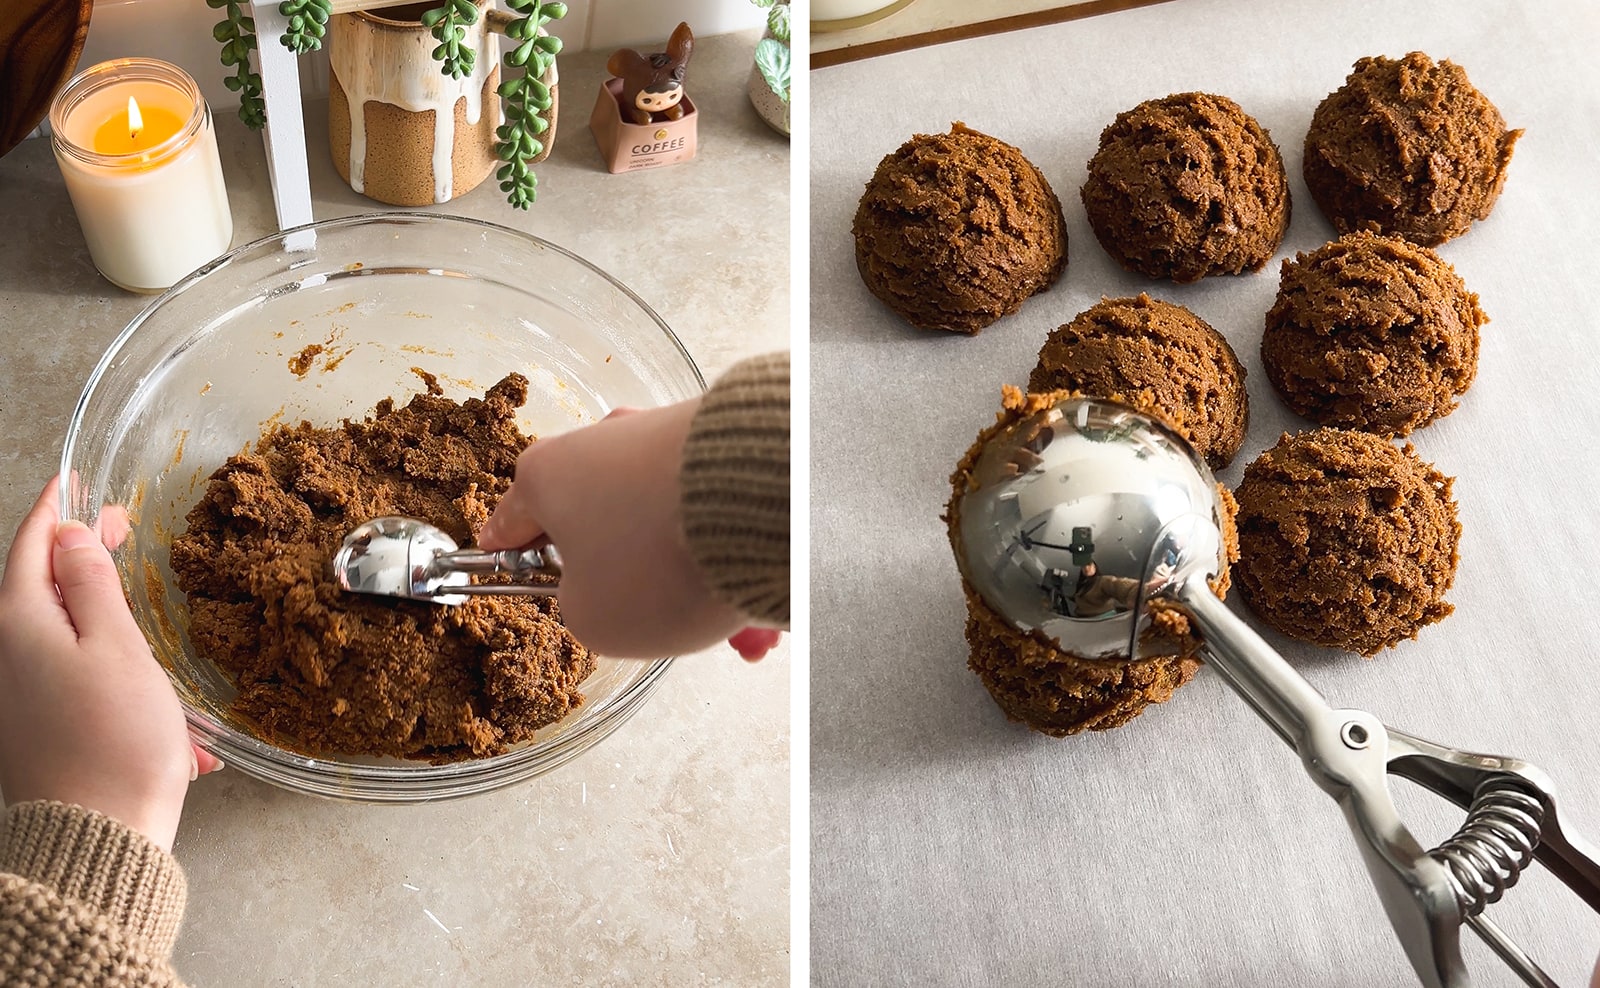 Left to right: scooping cookie dough with a cookie scoop, released cookie dough balls from scooper onto parchment paper.